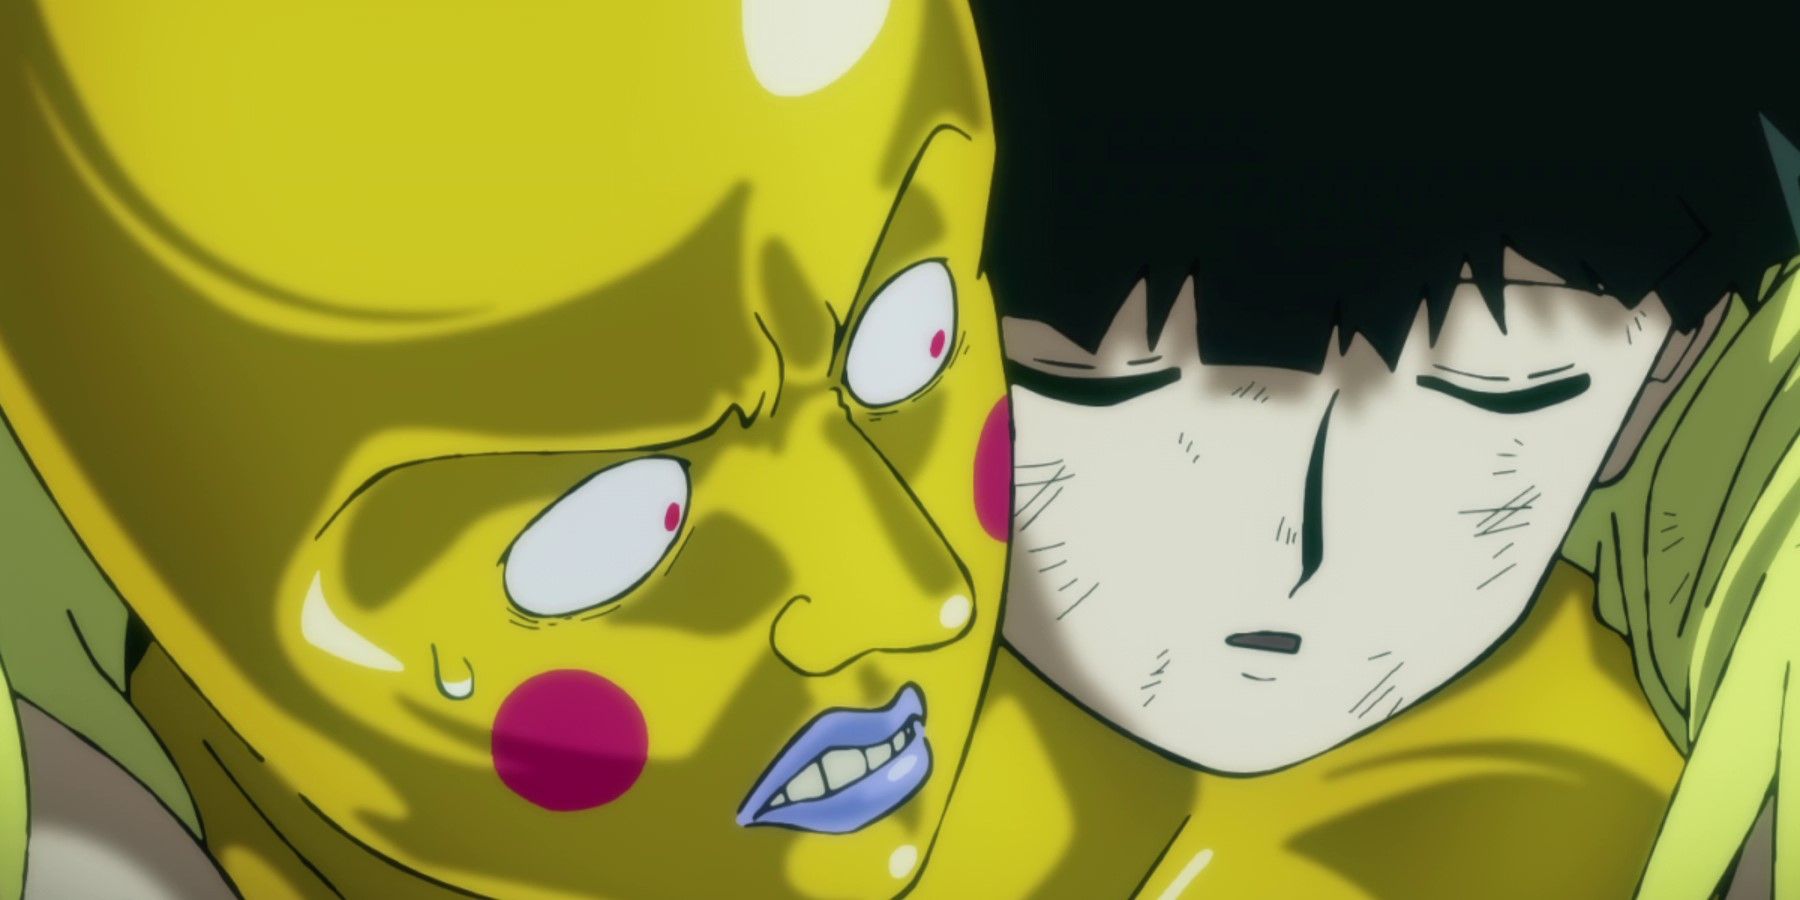 Dimple Carries Mob – Mob Psycho 100 III Episode 6